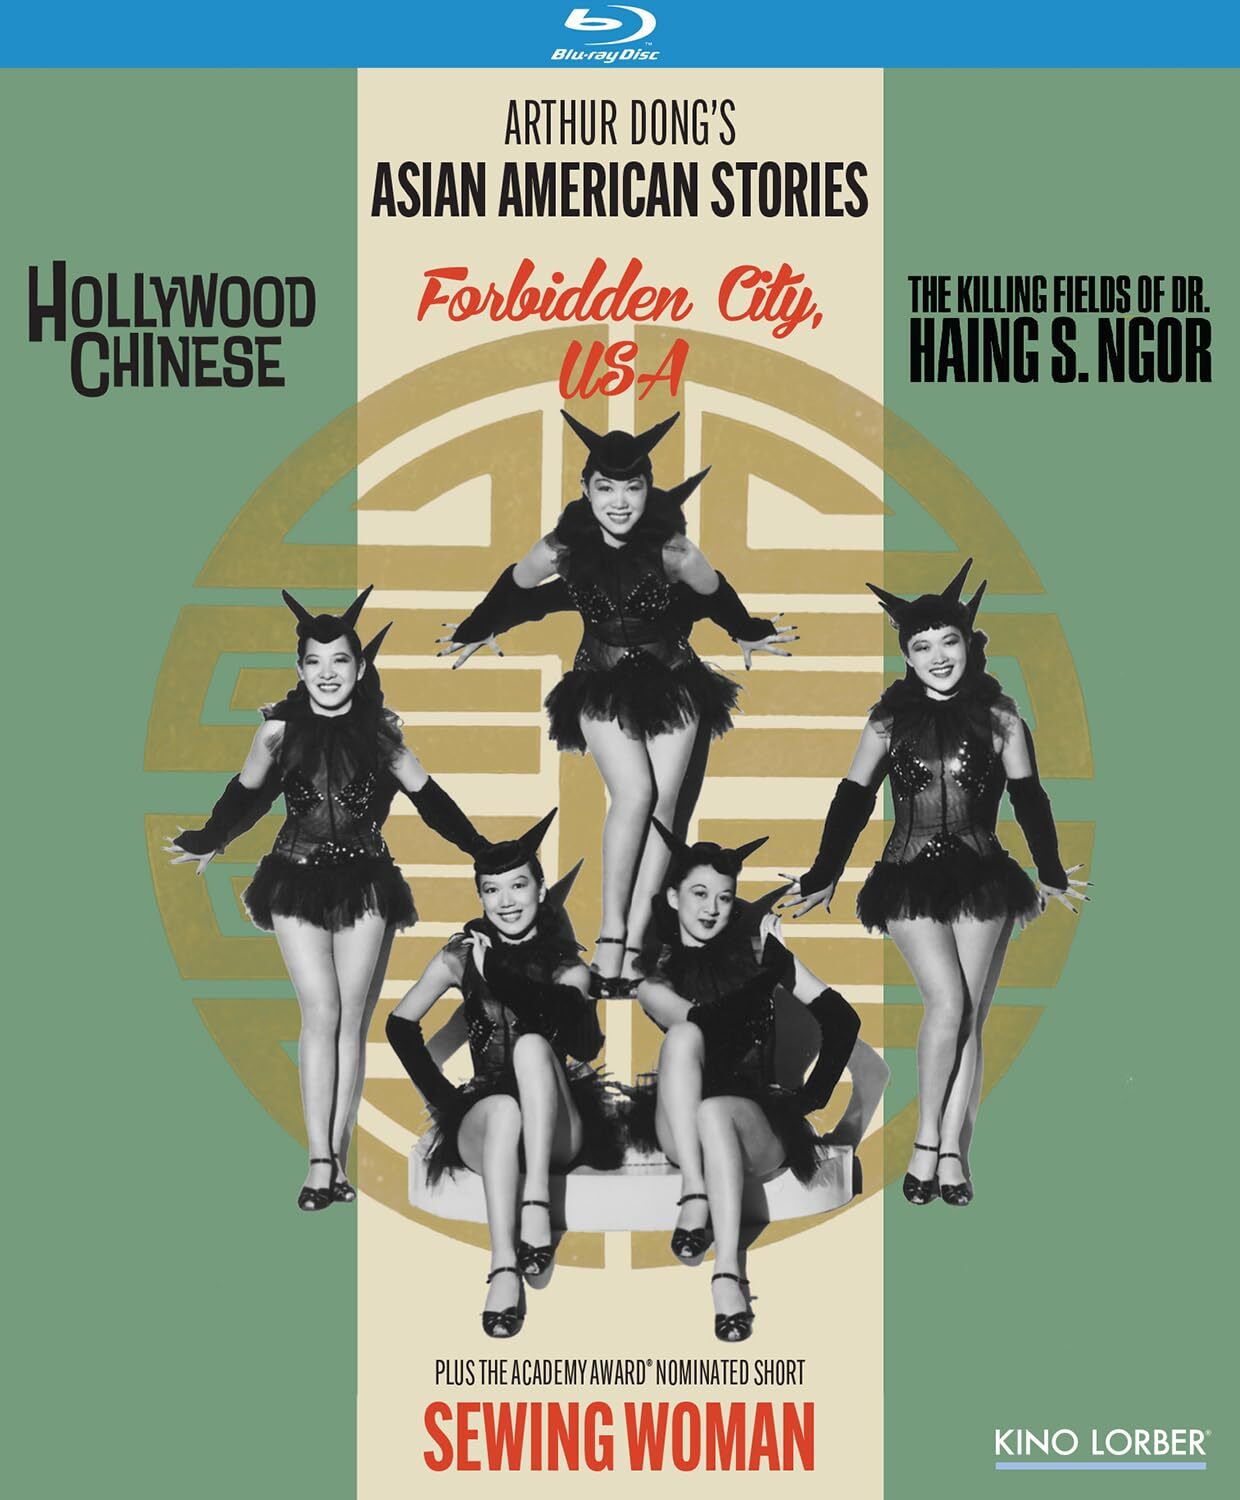 ARTHUR DONG'S ASIAN AMERICAN STORIES BLU-RAY [PRE-ORDER]